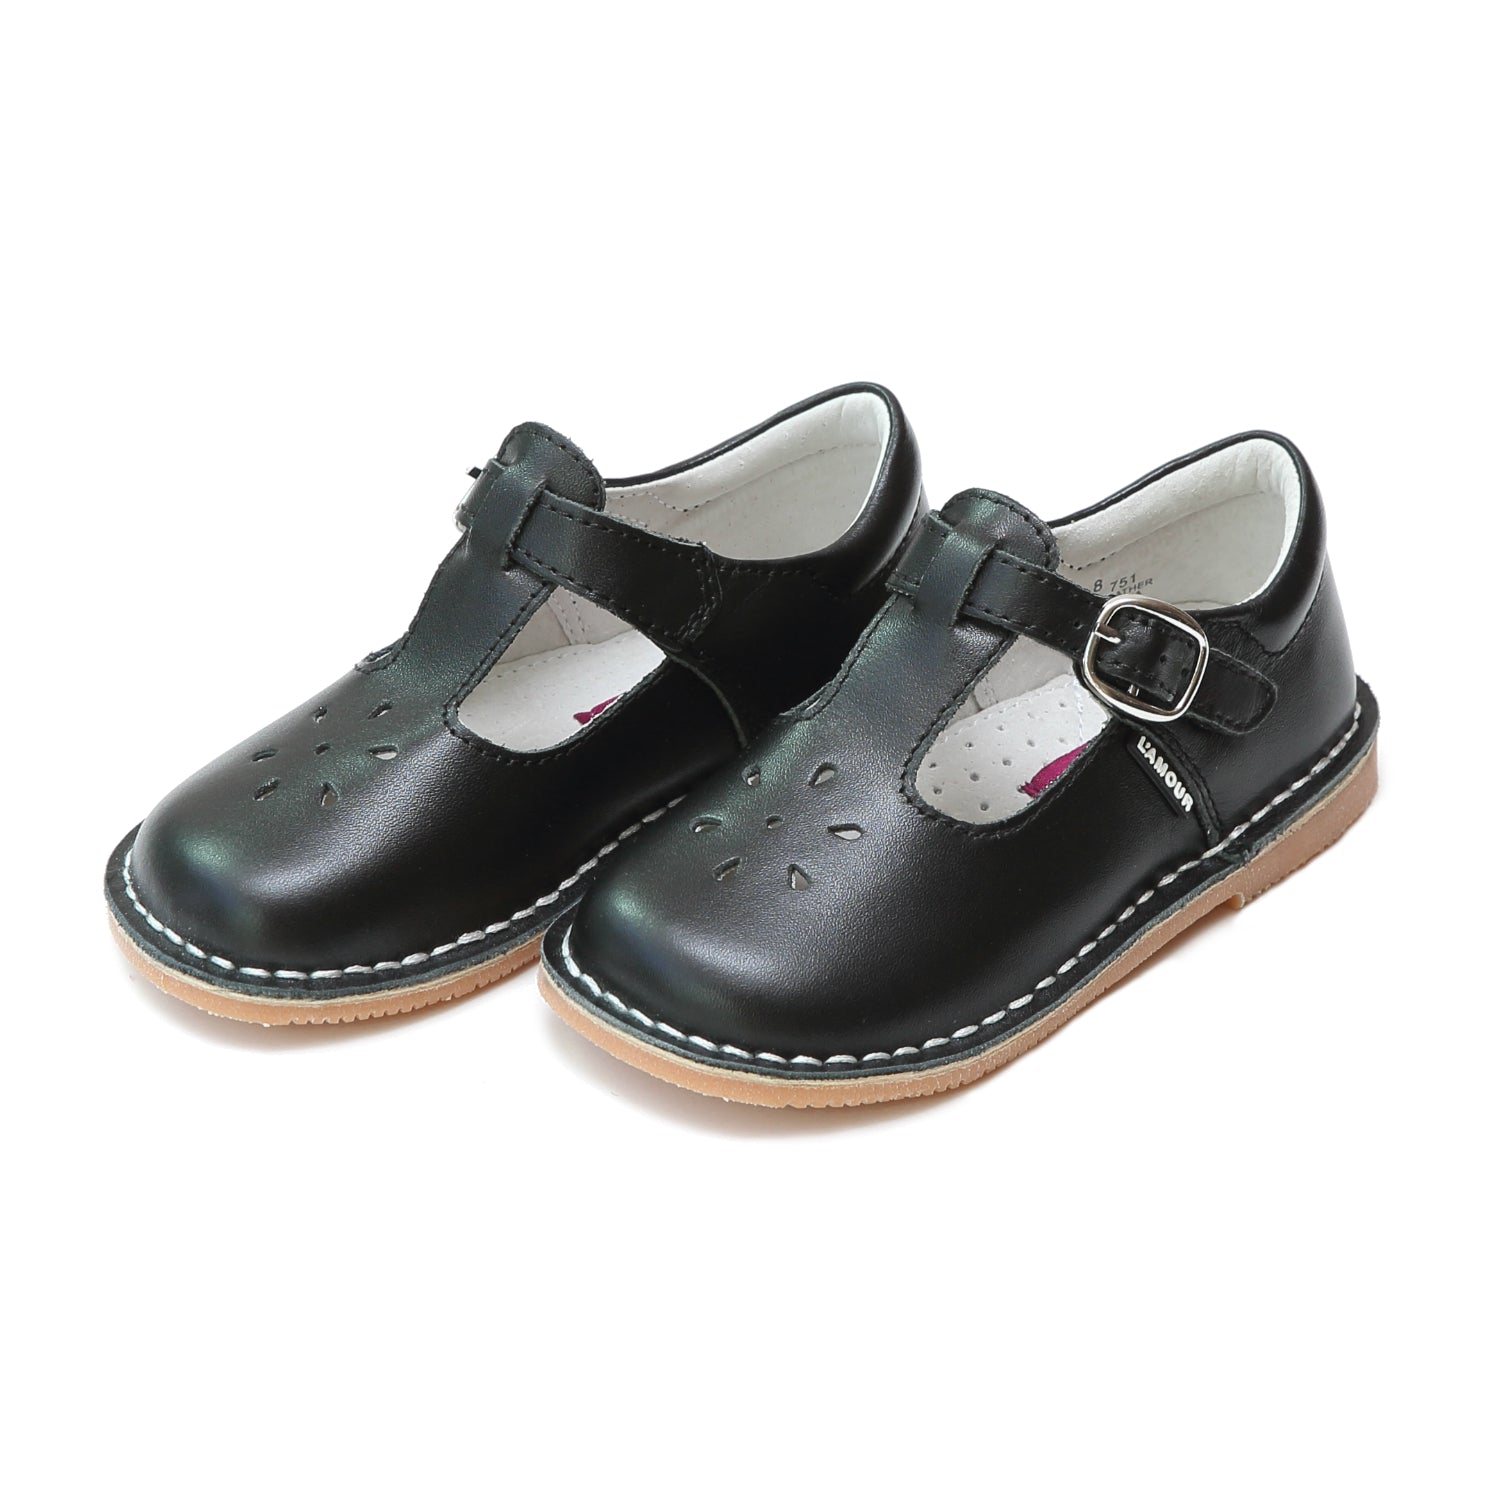 black mary janes for toddlers